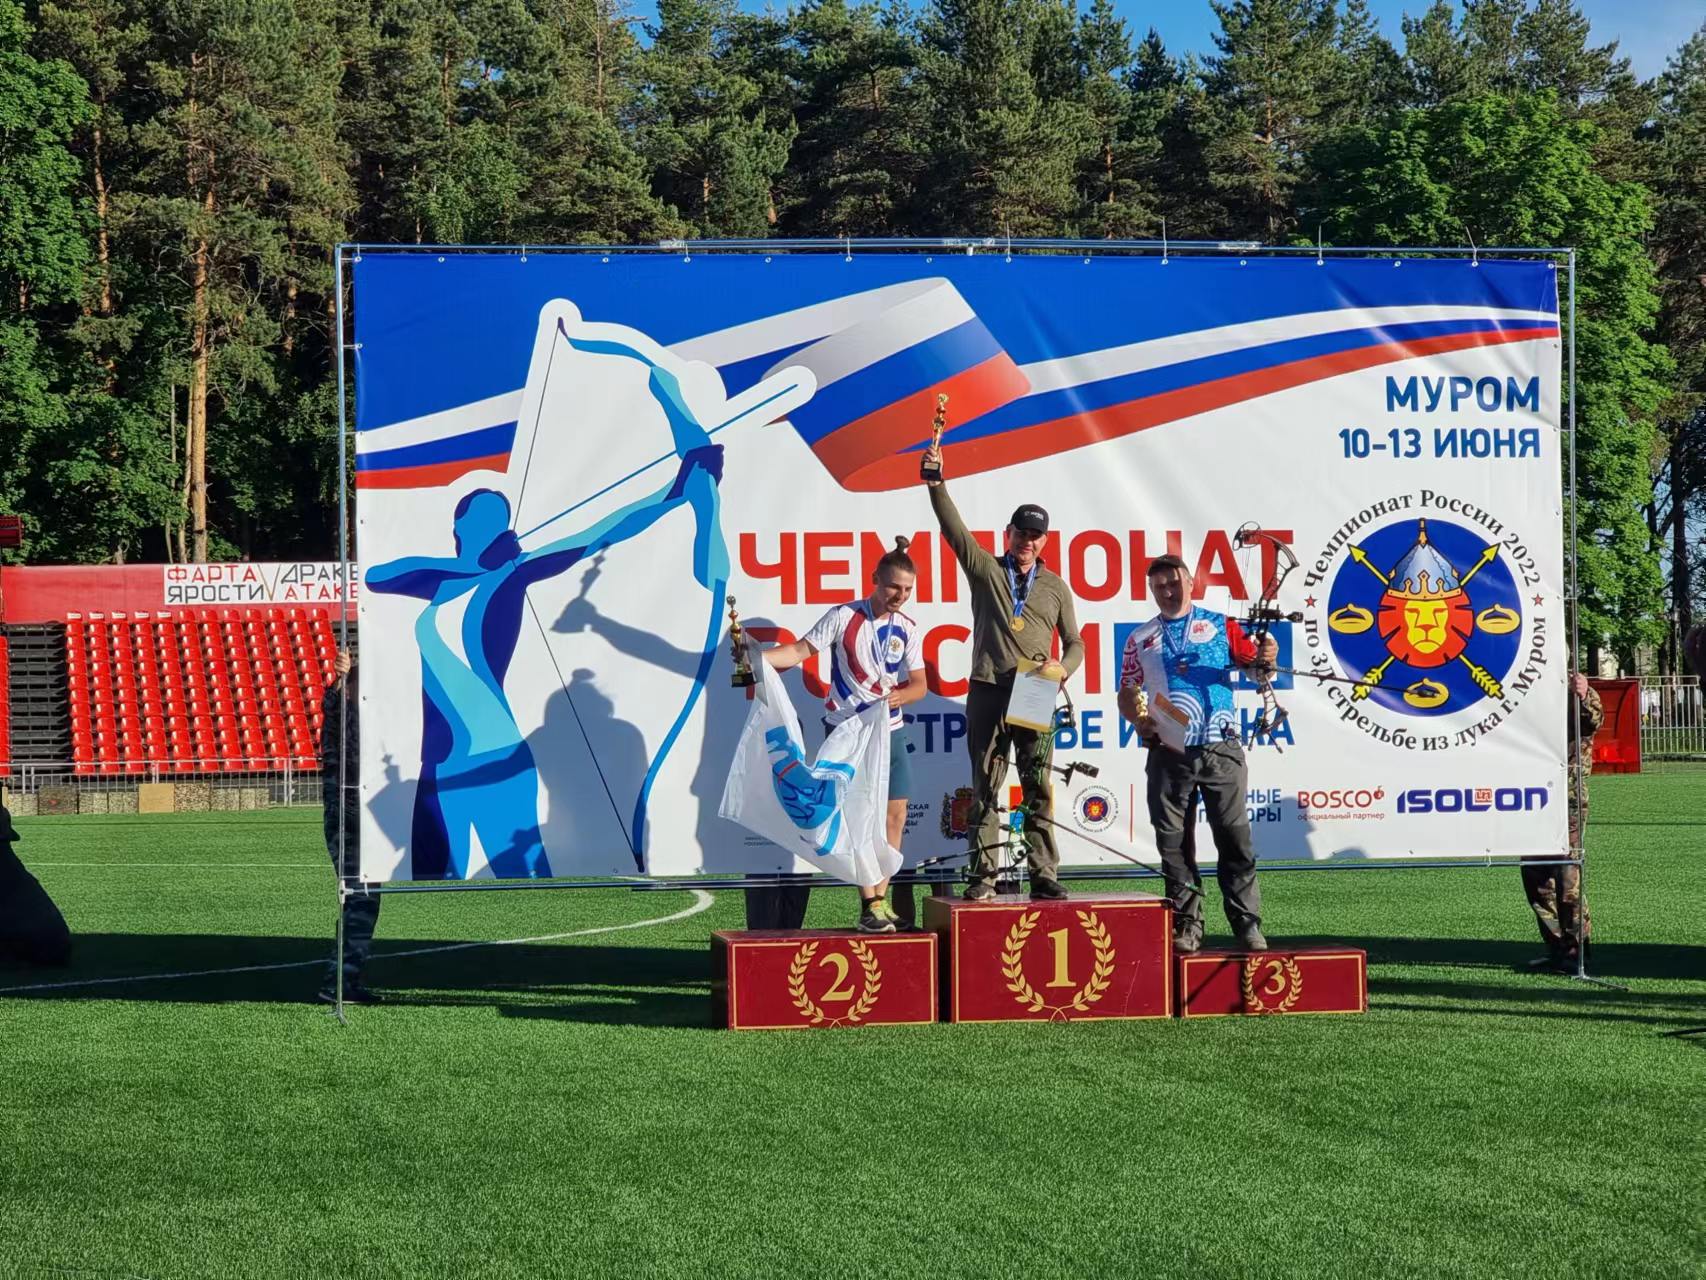 Alexey Borisoc won gold medal with Hero X10 at the Russian Championship 3D arche